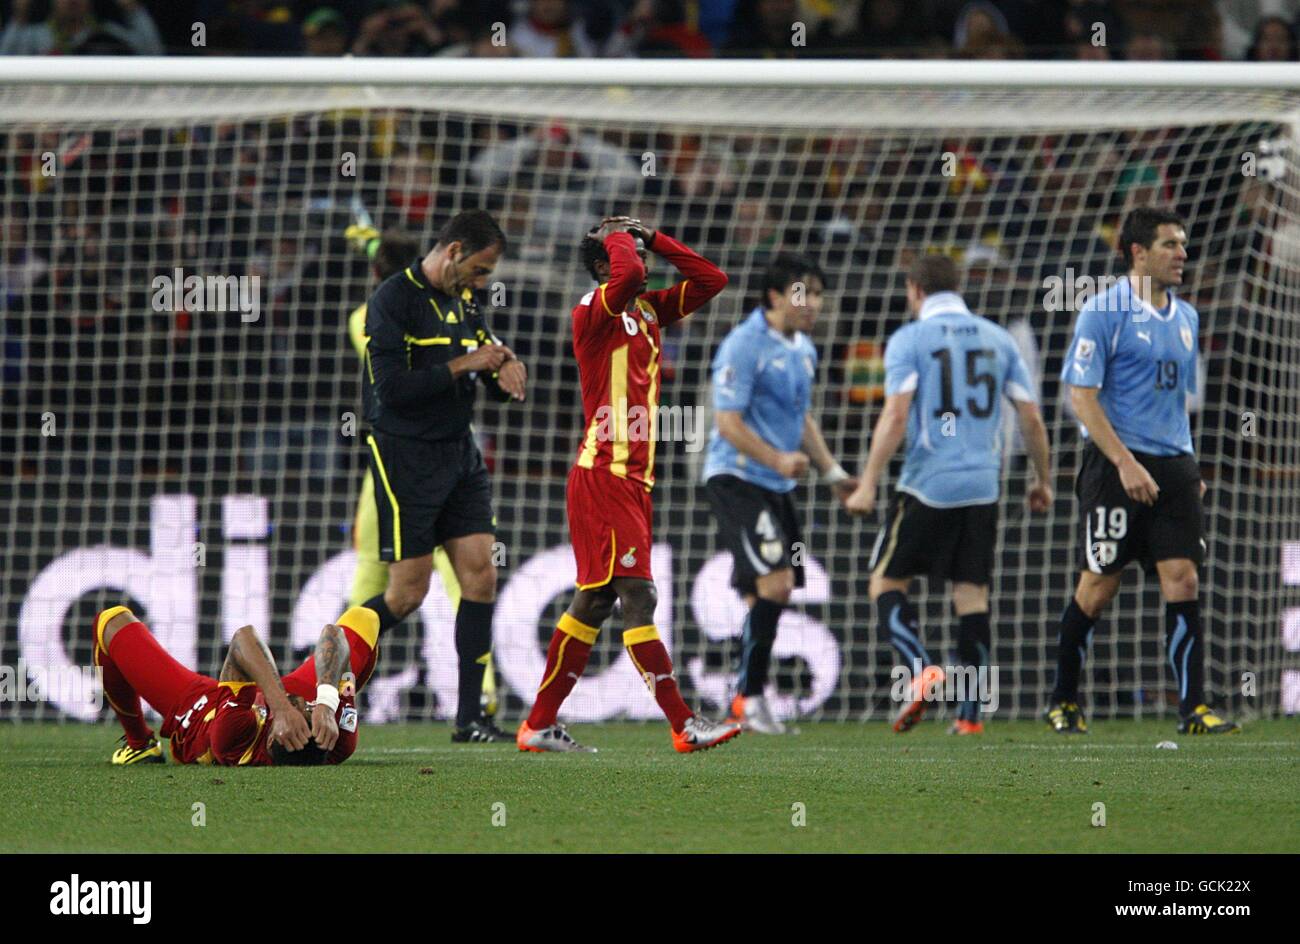 Soccer - 2010 FIFA World Cup South Africa - Quarter Final - Uruguay v Ghana - Soccer City Stadium. Ghana's Kevin-Prince Boateng (floor) and Anthony Annan react after Asamoah Gyan misses a penalty in the last minute of extra time Stock Photo